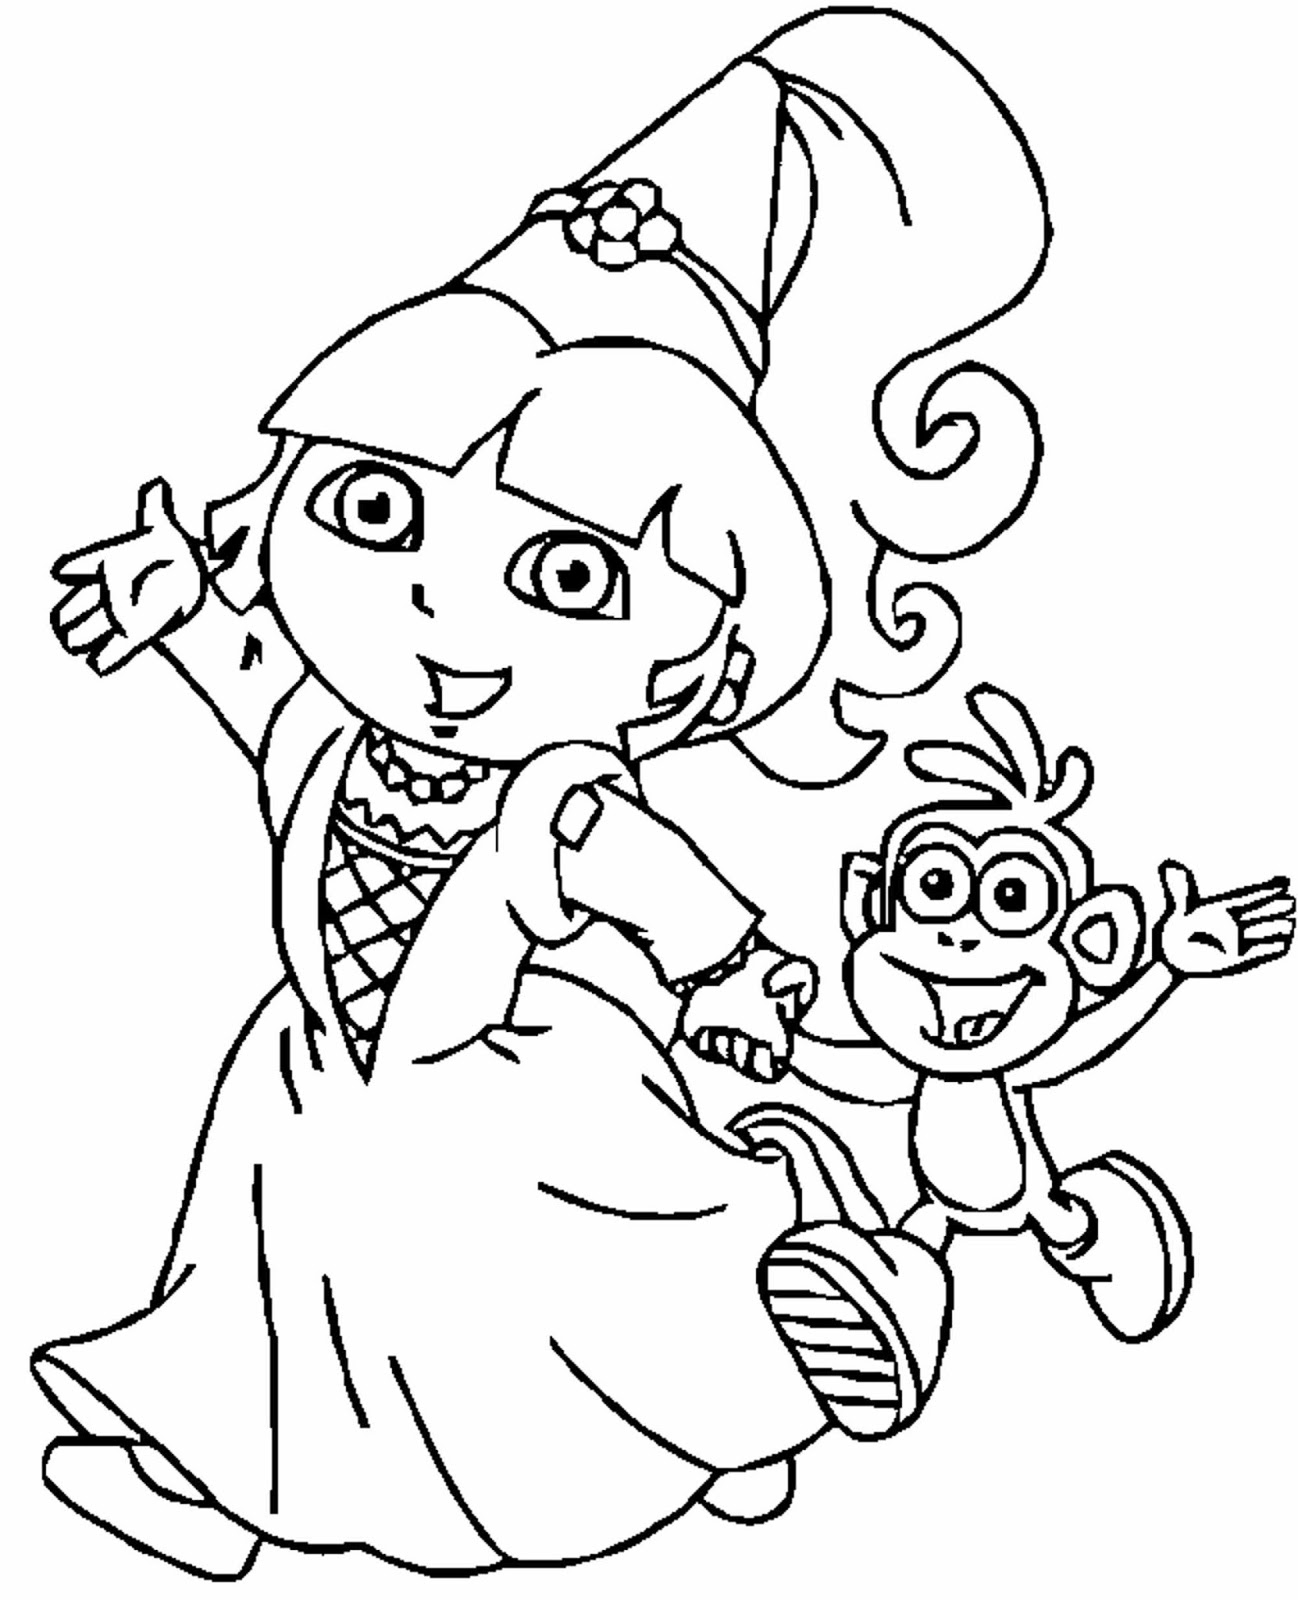 free-printable-nickelodeon-halloween-coloring-pages-for-kids-funny